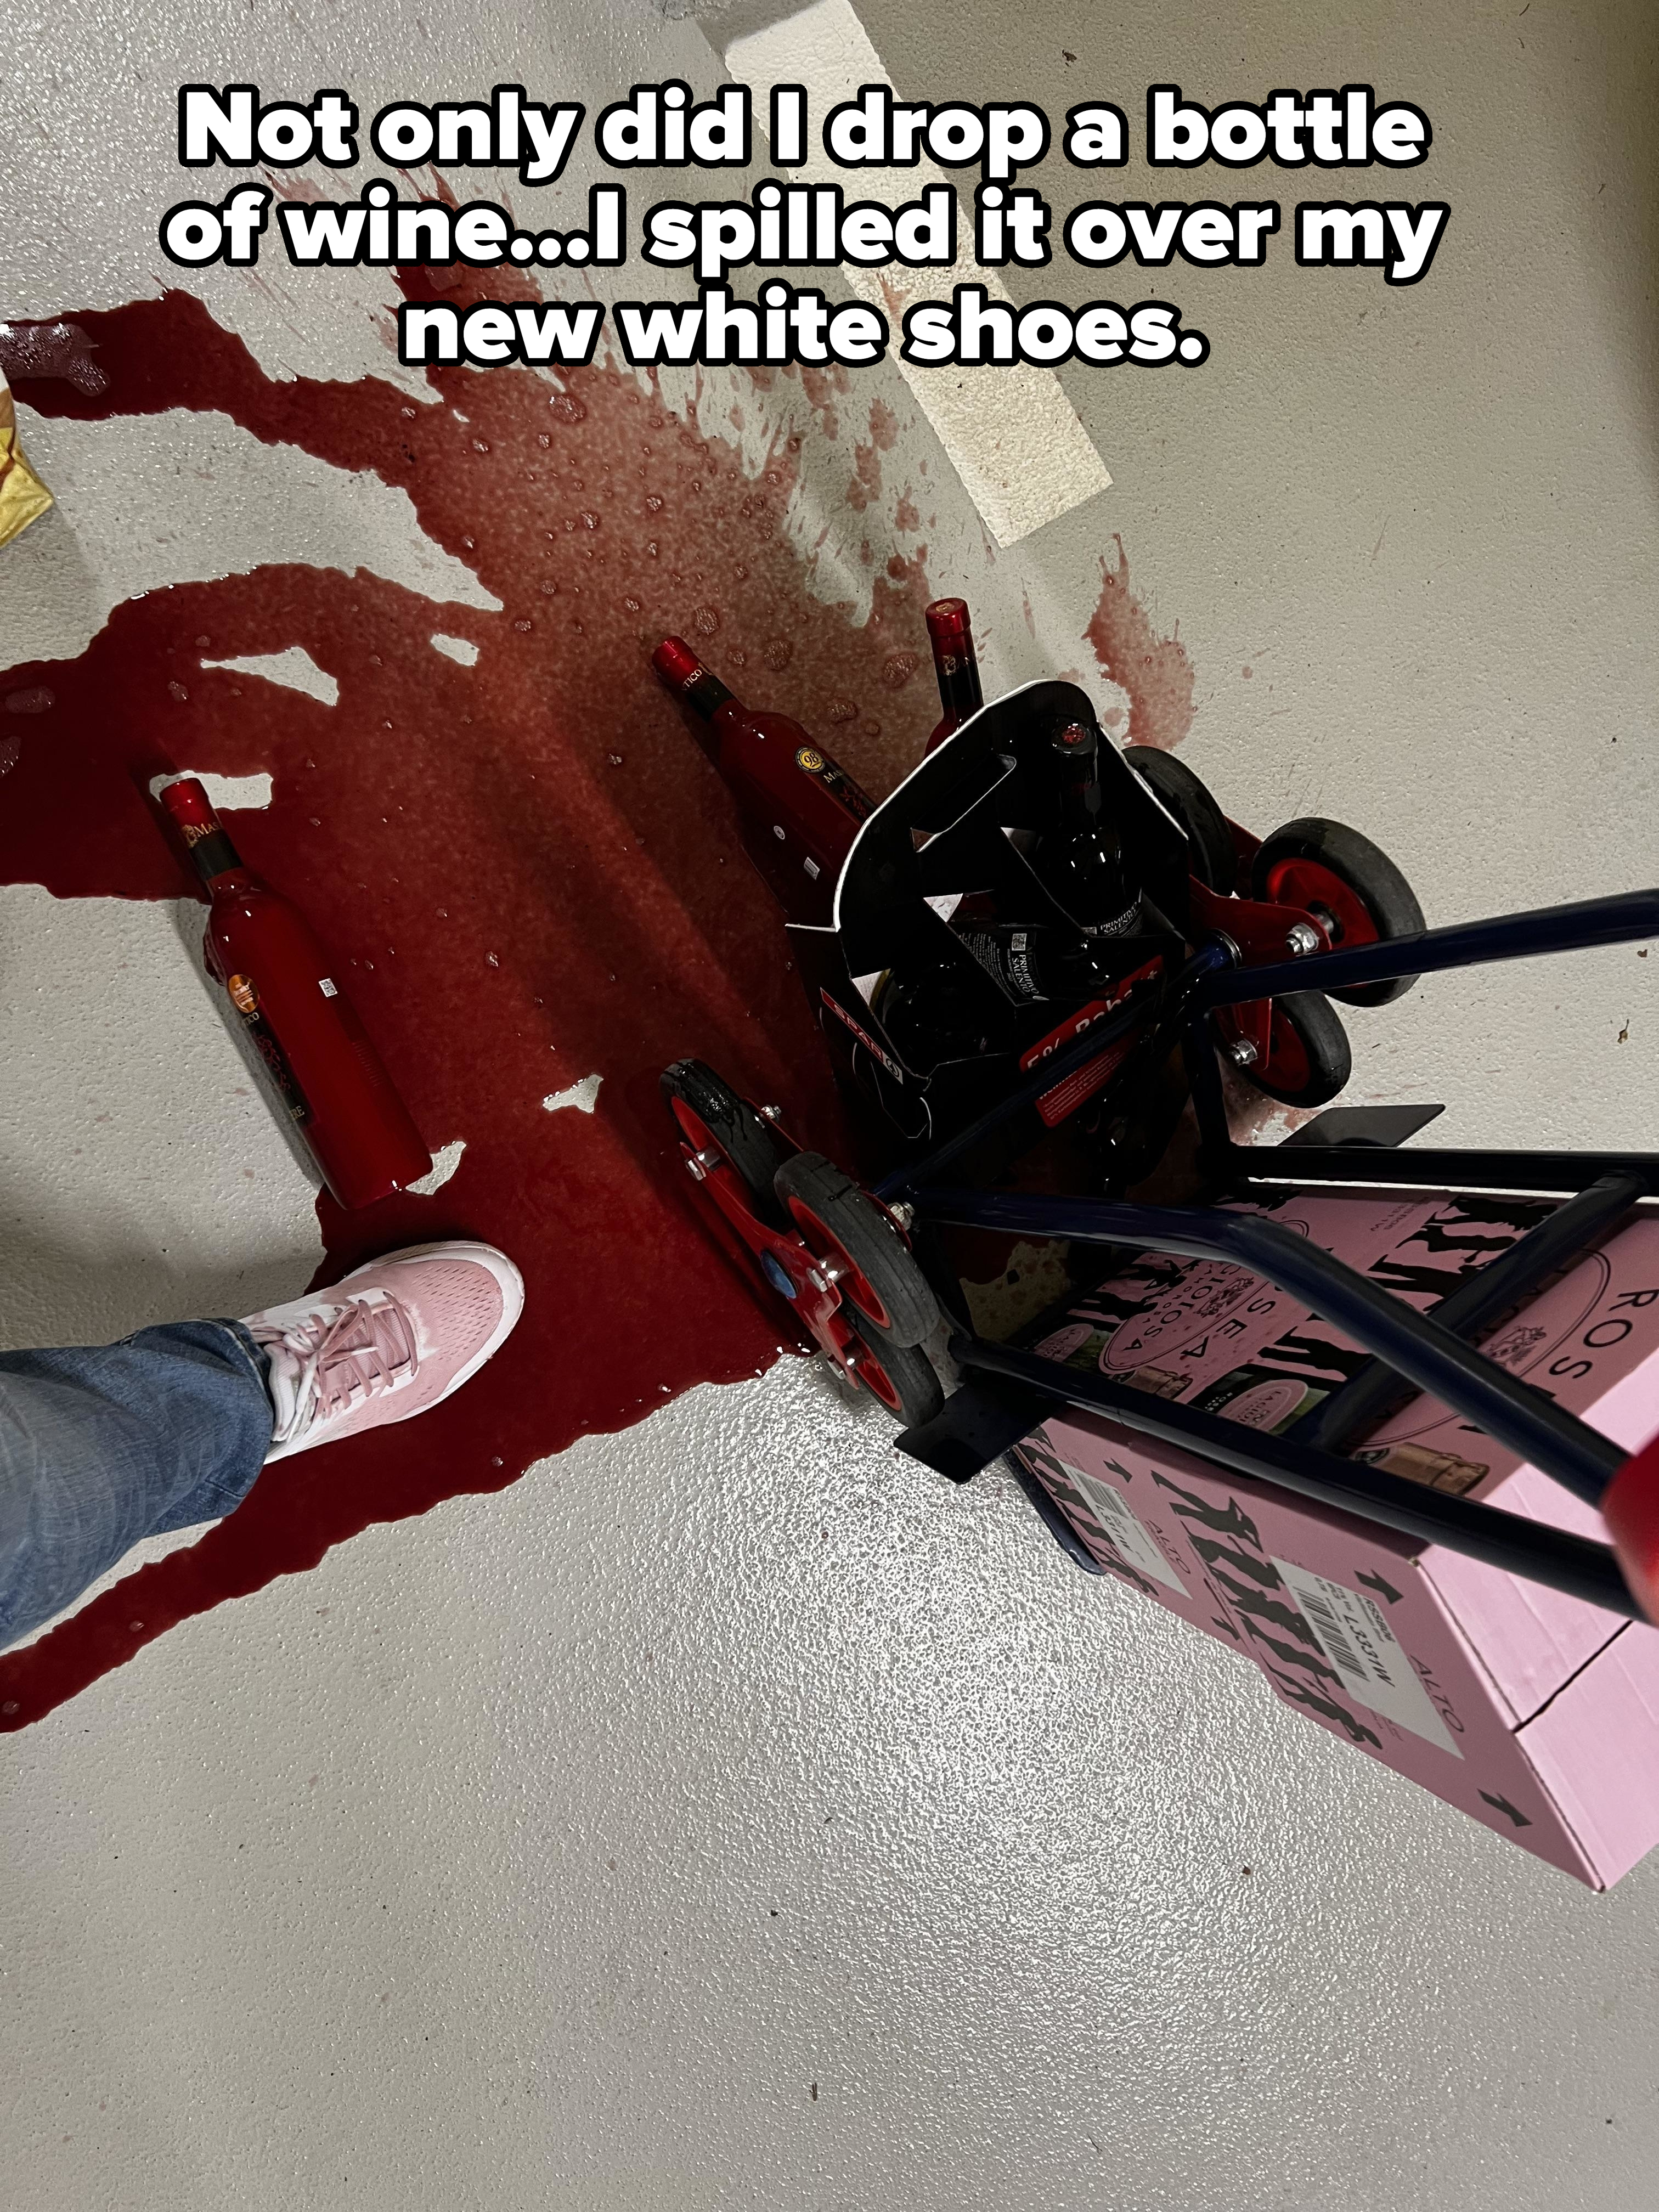 Overturned cart with spilled red wine on a garage floor, next to a person&#x27;s foot wearing a stained sneaker, with caption: &quot;Not only did I drop a bottle of wine, I spilled it over my new white shoes&quot;